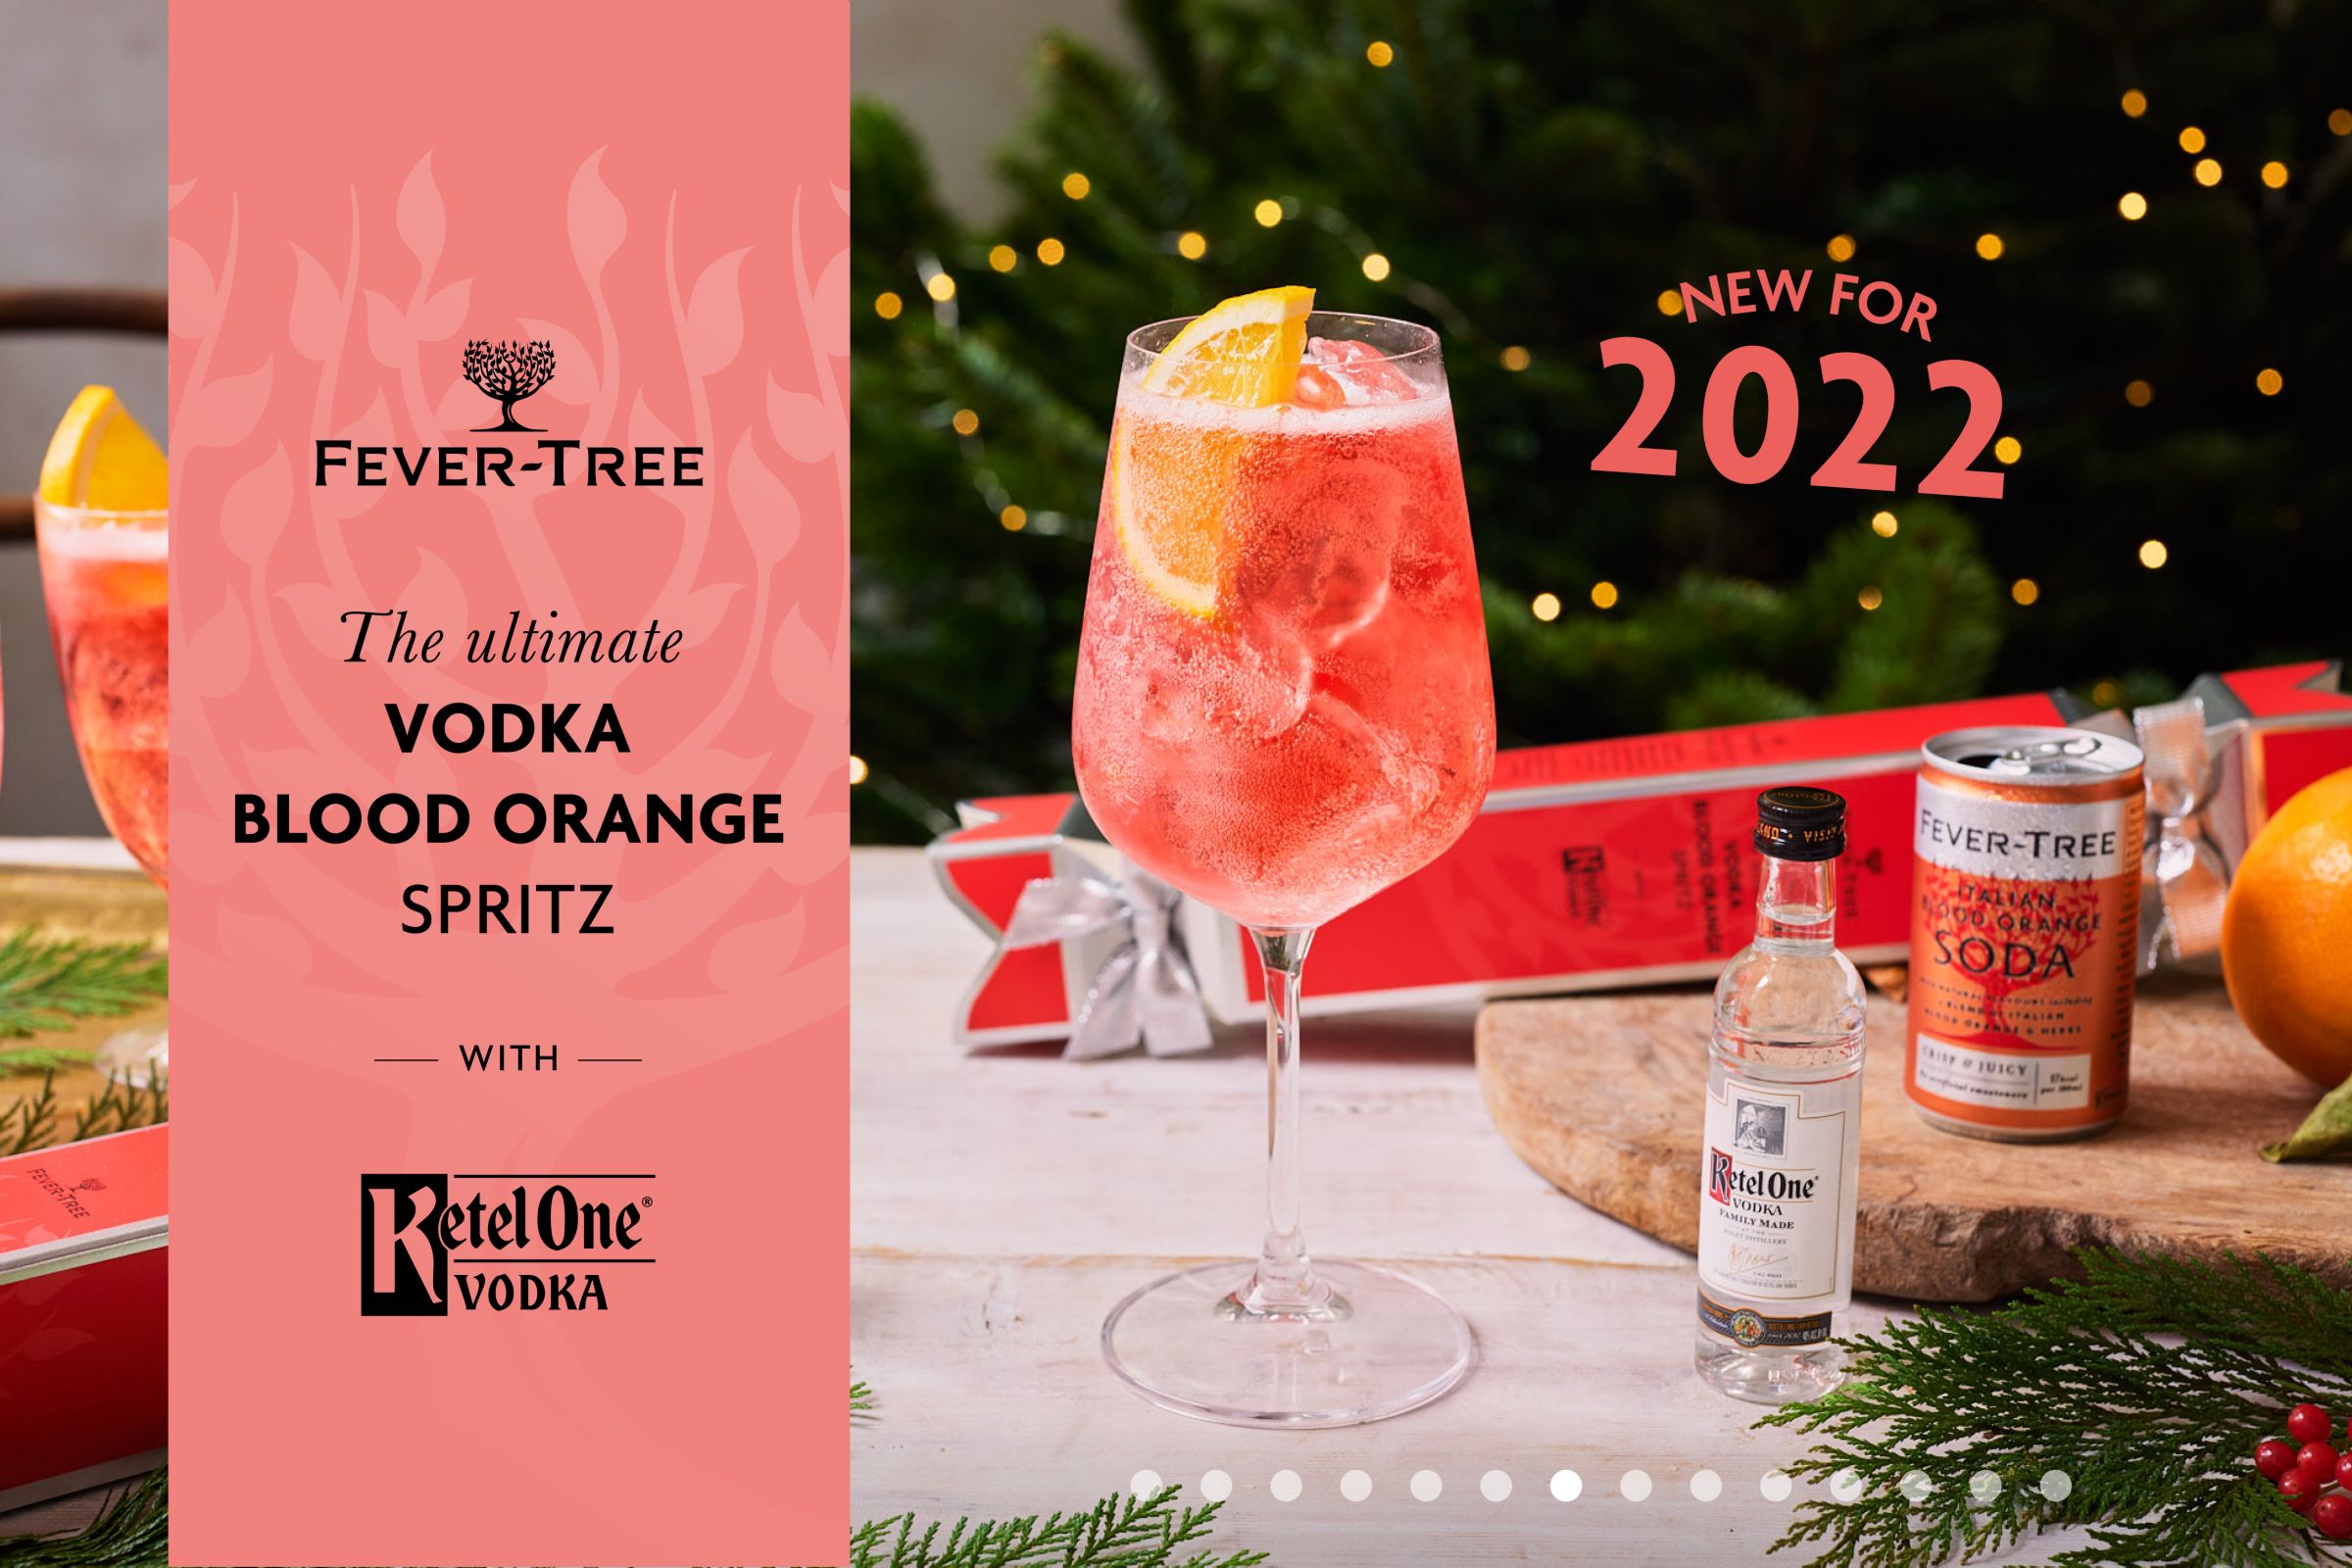 Buy Fever-Tree Tarquin's Rhubarb & Raspberry Gin and Refreshingly Light Mediterranean Tonic Water Cracker, 5cl & 150ml Online at johnlewis.com Buy Fever-Tree Tarquin's Rhubarb & Raspberry Gin and Refreshingly Light Mediterranean Tonic Water Cracker, 5cl & 150ml Online at johnlewis.com Buy Fever-Tree Tarquin's Rhubarb & Raspberry Gin and Refreshingly Light Mediterranean Tonic Water Cracker, 5cl & 150ml Online at johnlewis.com Buy Fever-Tree Tarquin's Rhubarb & Raspberry Gin and Refreshingly Light Mediterranean Tonic Water Cracker, 5cl & 150ml Online at johnlewis.com Buy Fever-Tree Tarquin's Rhubarb & Raspberry Gin and Refreshingly Light Mediterranean Tonic Water Cracker, 5cl & 150ml Online at johnlewis.com Fever-Tree Tarquin's Rhubarb & Raspberry Gin and Refreshingly Light Mediterranean Tonic Water Cracker, 5cl & 150ml